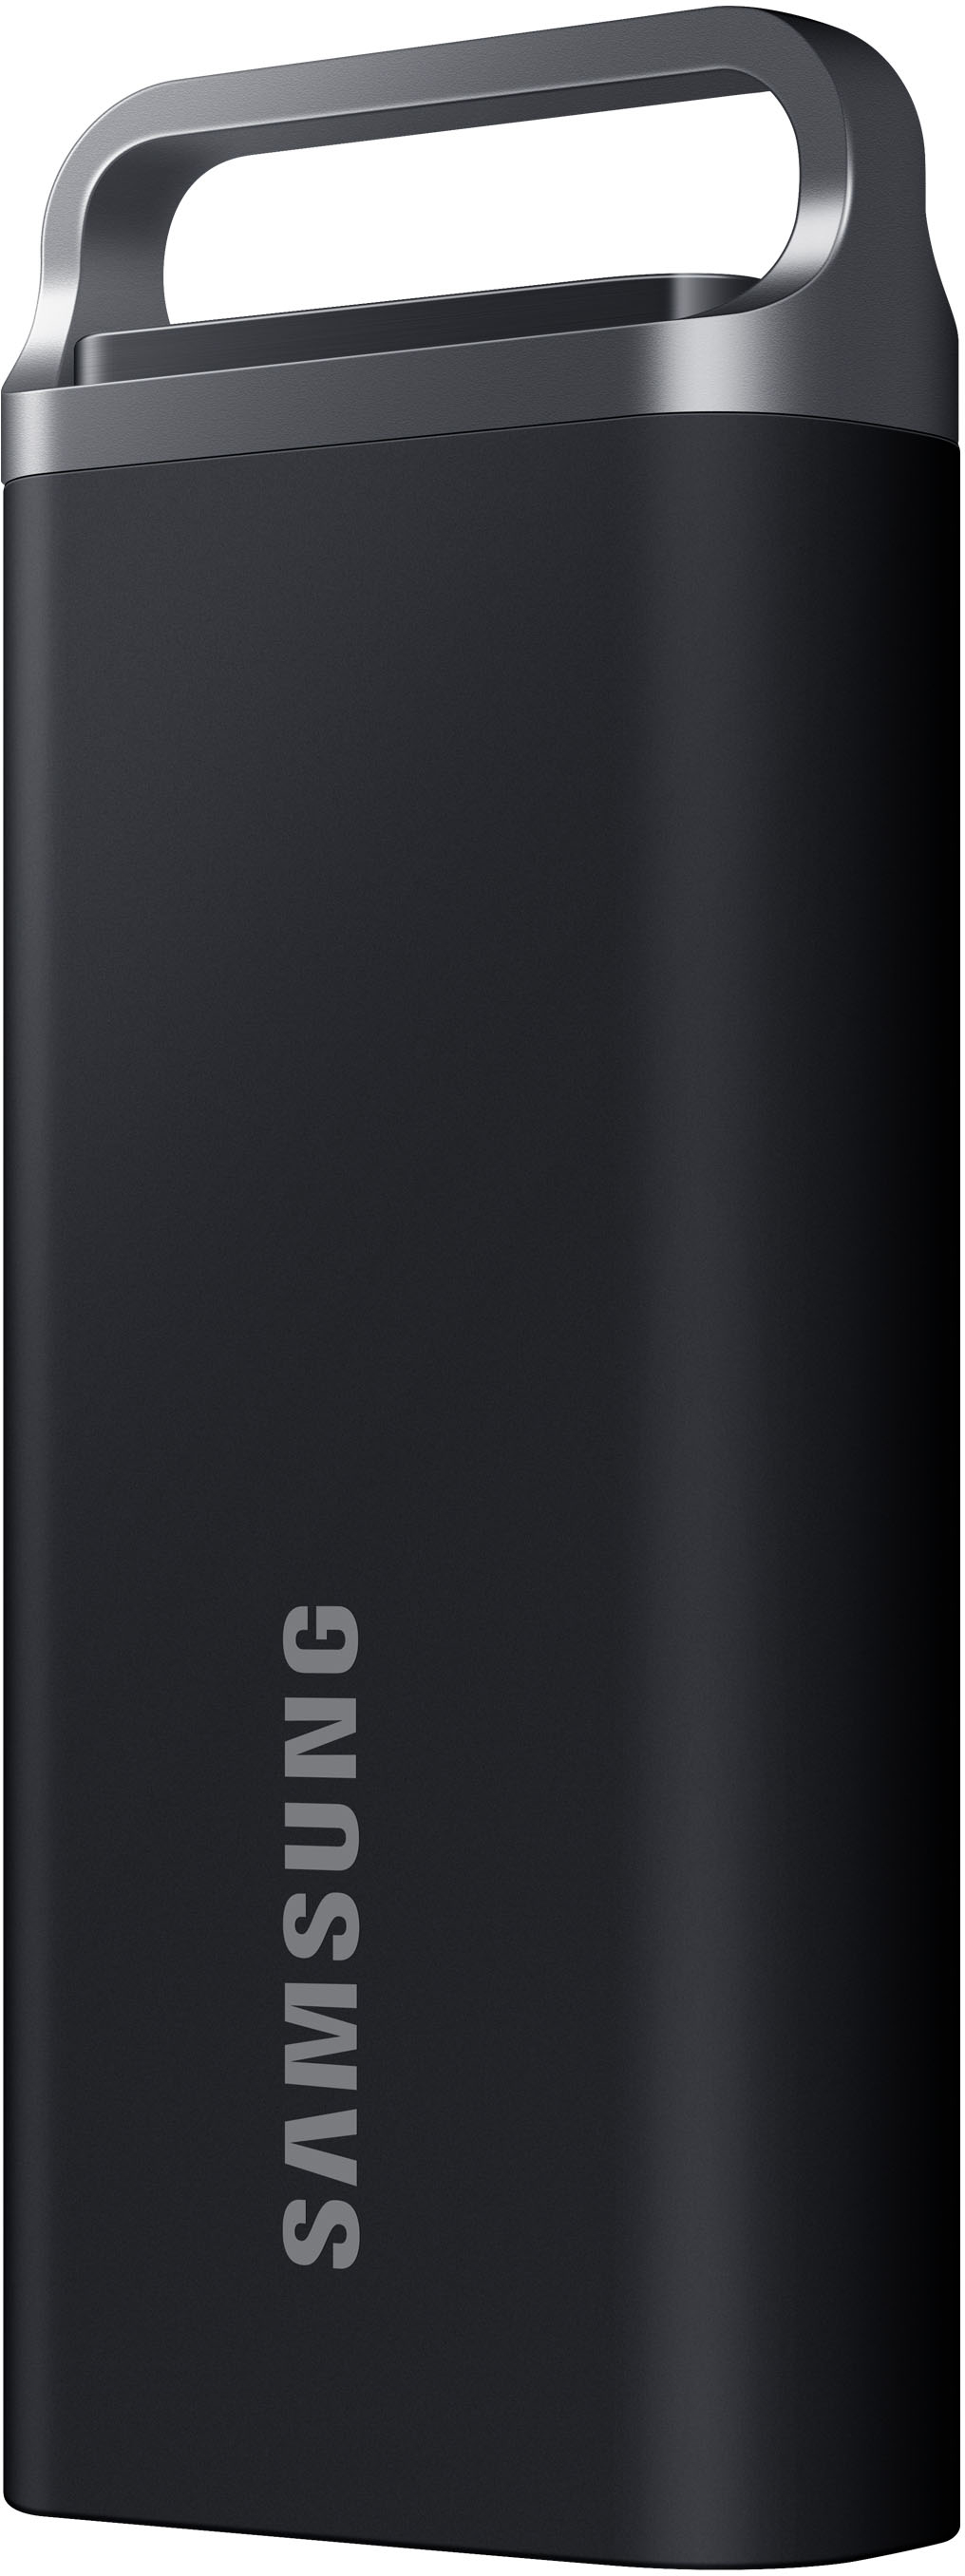 Samsung T5 EVO Portable SSD 4TB, Up to 460MB/s , USB 3.2 Gen 1, Ideal use  for Gamers & Creators Black MU-PH4T0S/AM - Best Buy